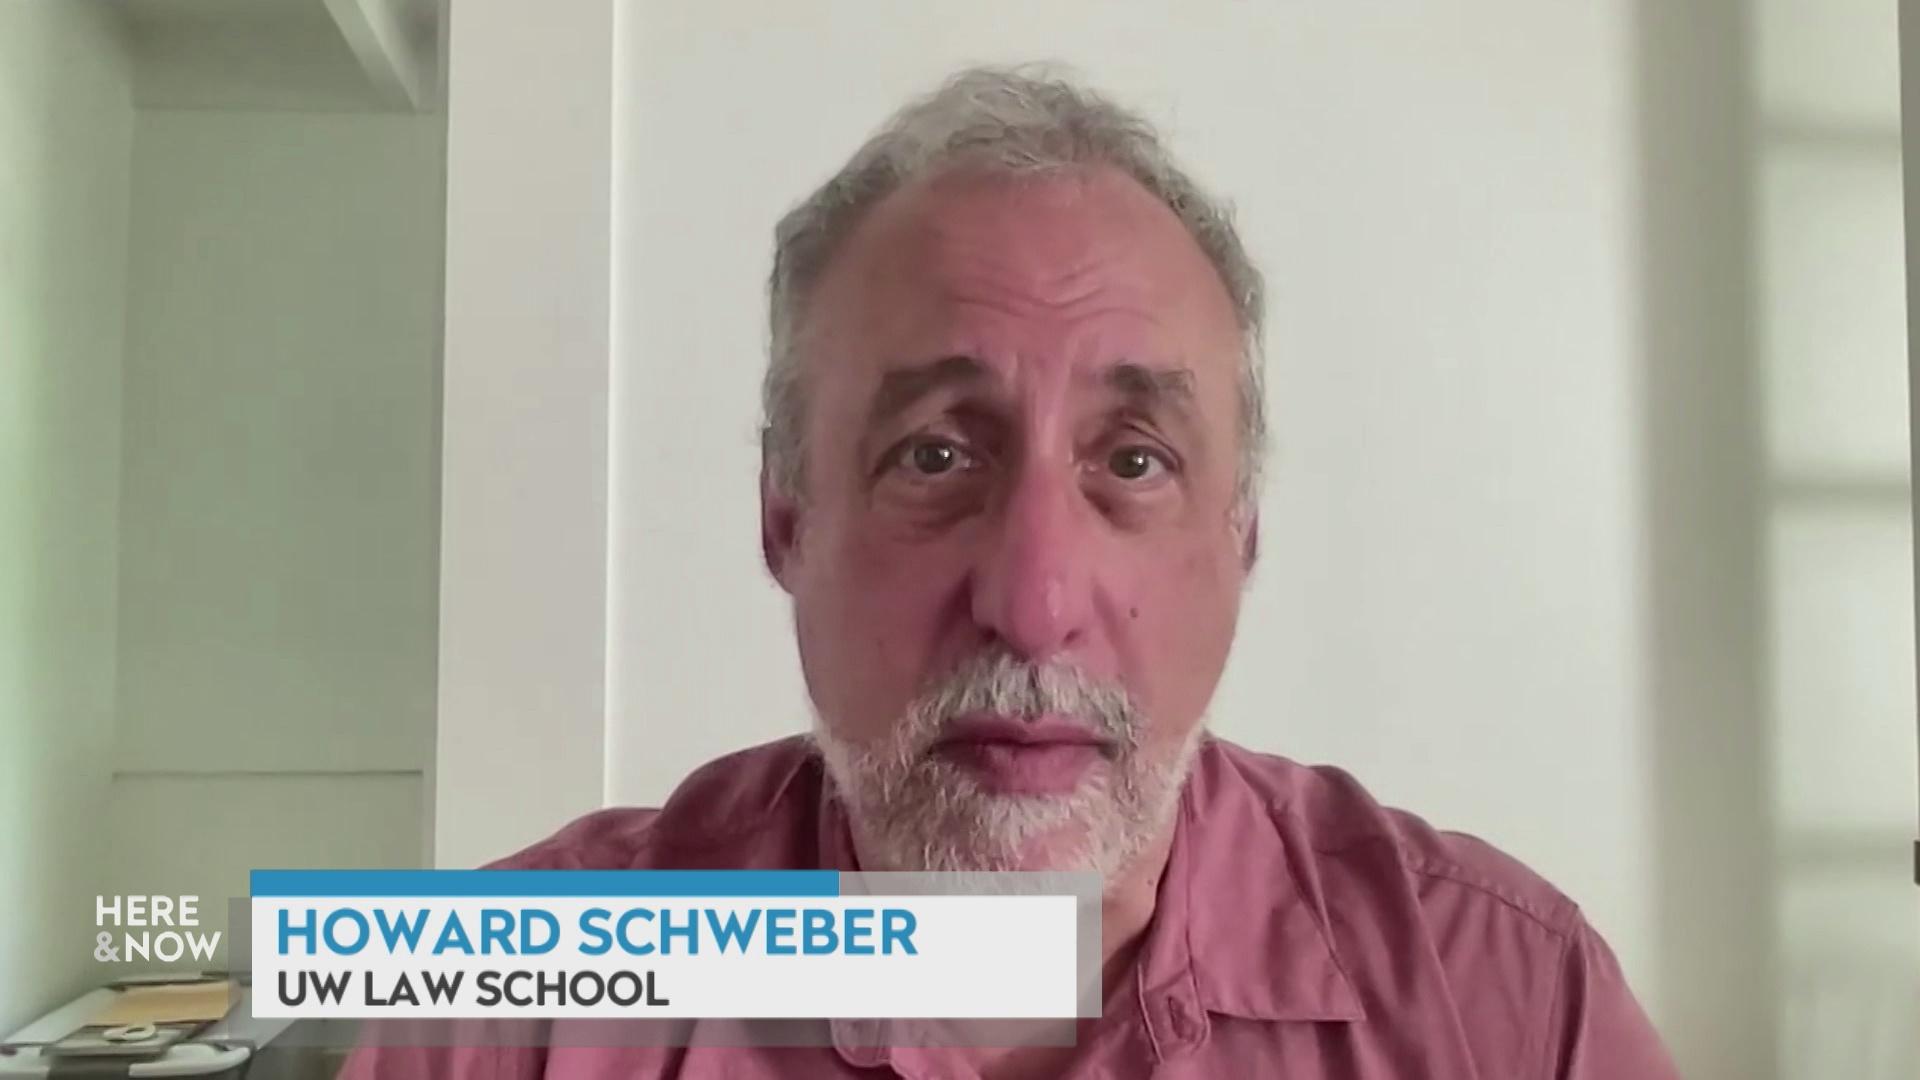 A still image from a video shows Howard Schweber seated in front of a white wall with a graphic at bottom reading 'Howard Schweber' and 'UW Law School.'